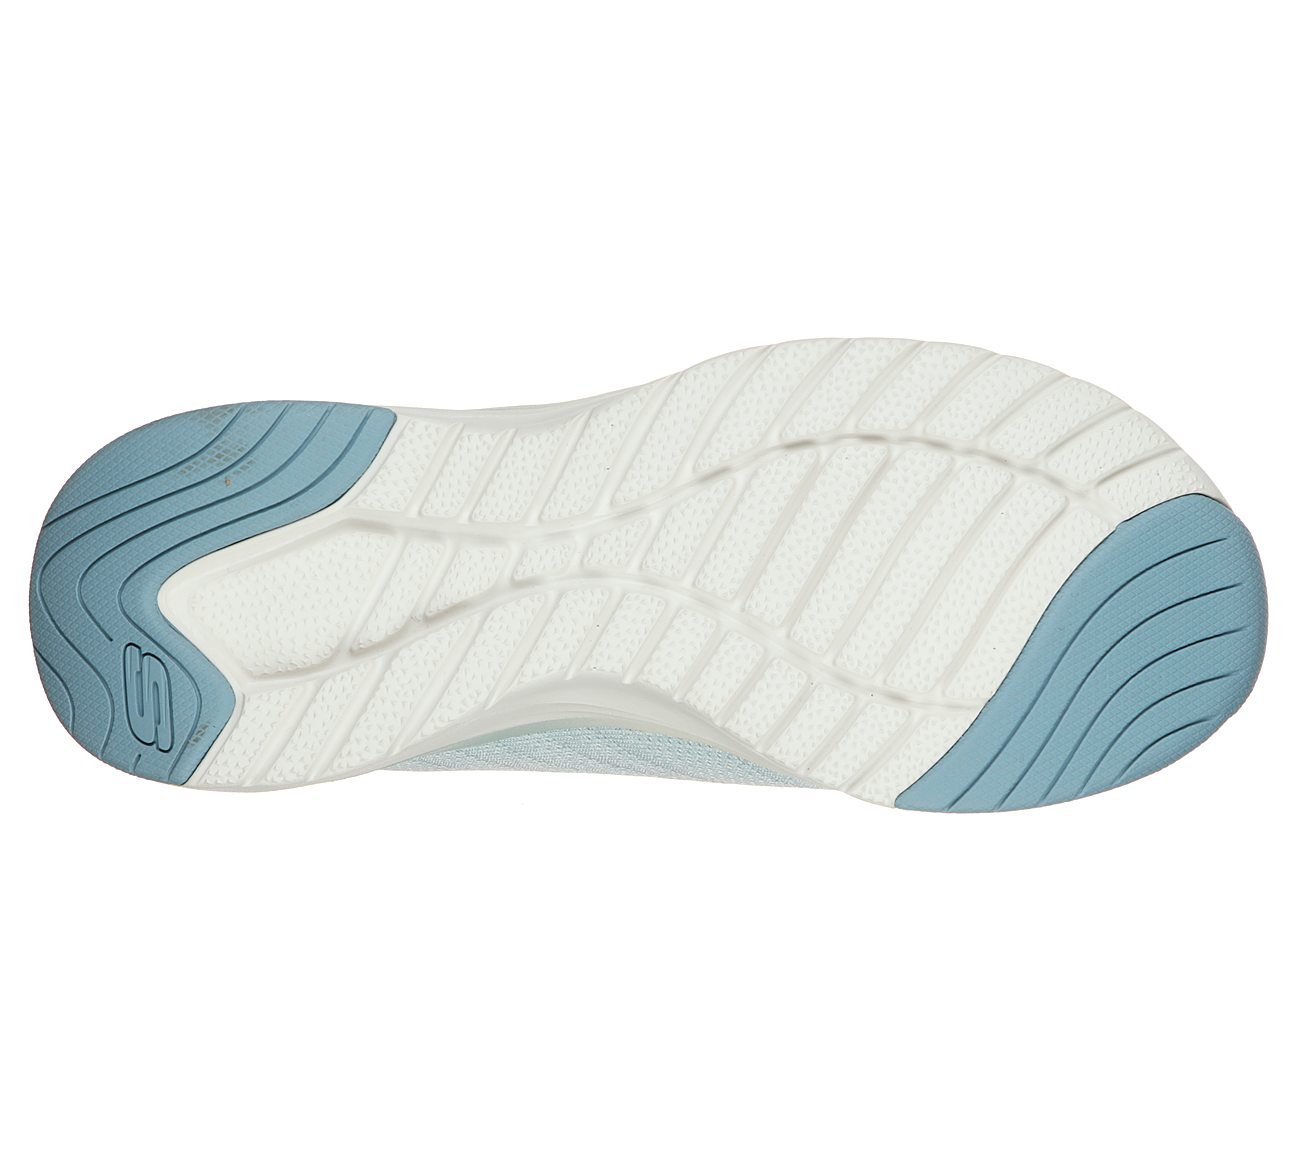 ULTRA GROOVE - PURE VISION, LLIGHT BLUE Footwear Bottom View